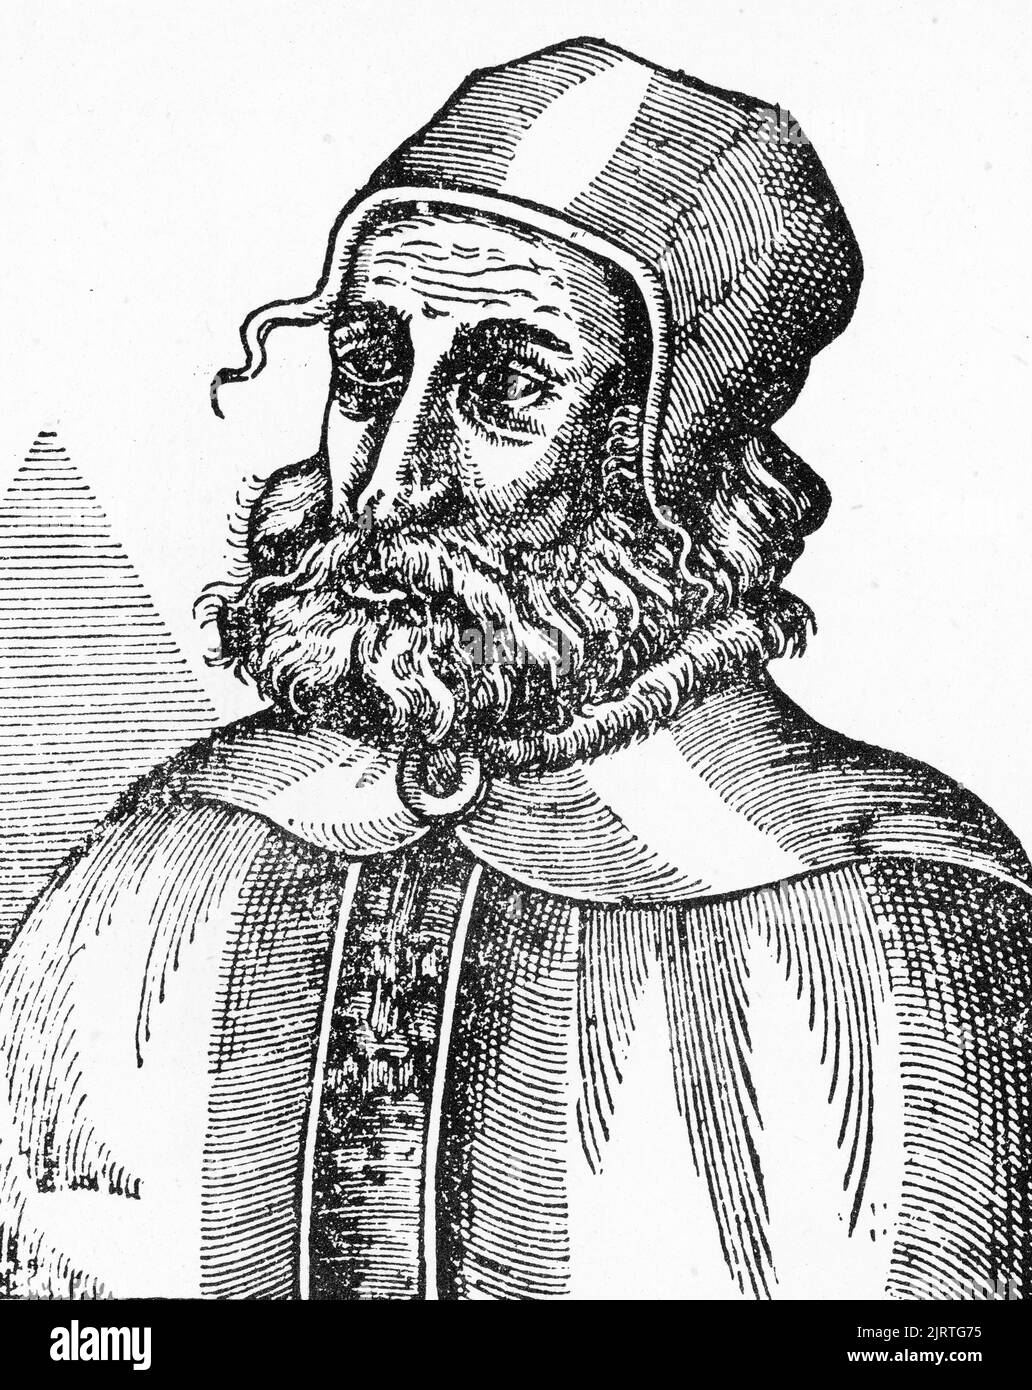 Aelius Galenus or Claudius Galenus (129-cAD 216), often Anglicized as Galen or Galen of Pergamon, 1582. Greek physician, surgeon and philosopher in the Roman Empire. He is considered to be one of the most accomplished of all medical researchers of antiquity. A woodcut from Ambroise Paré's Opera, 1582. Ambroise Paré (c1509-1590). Stock Photo